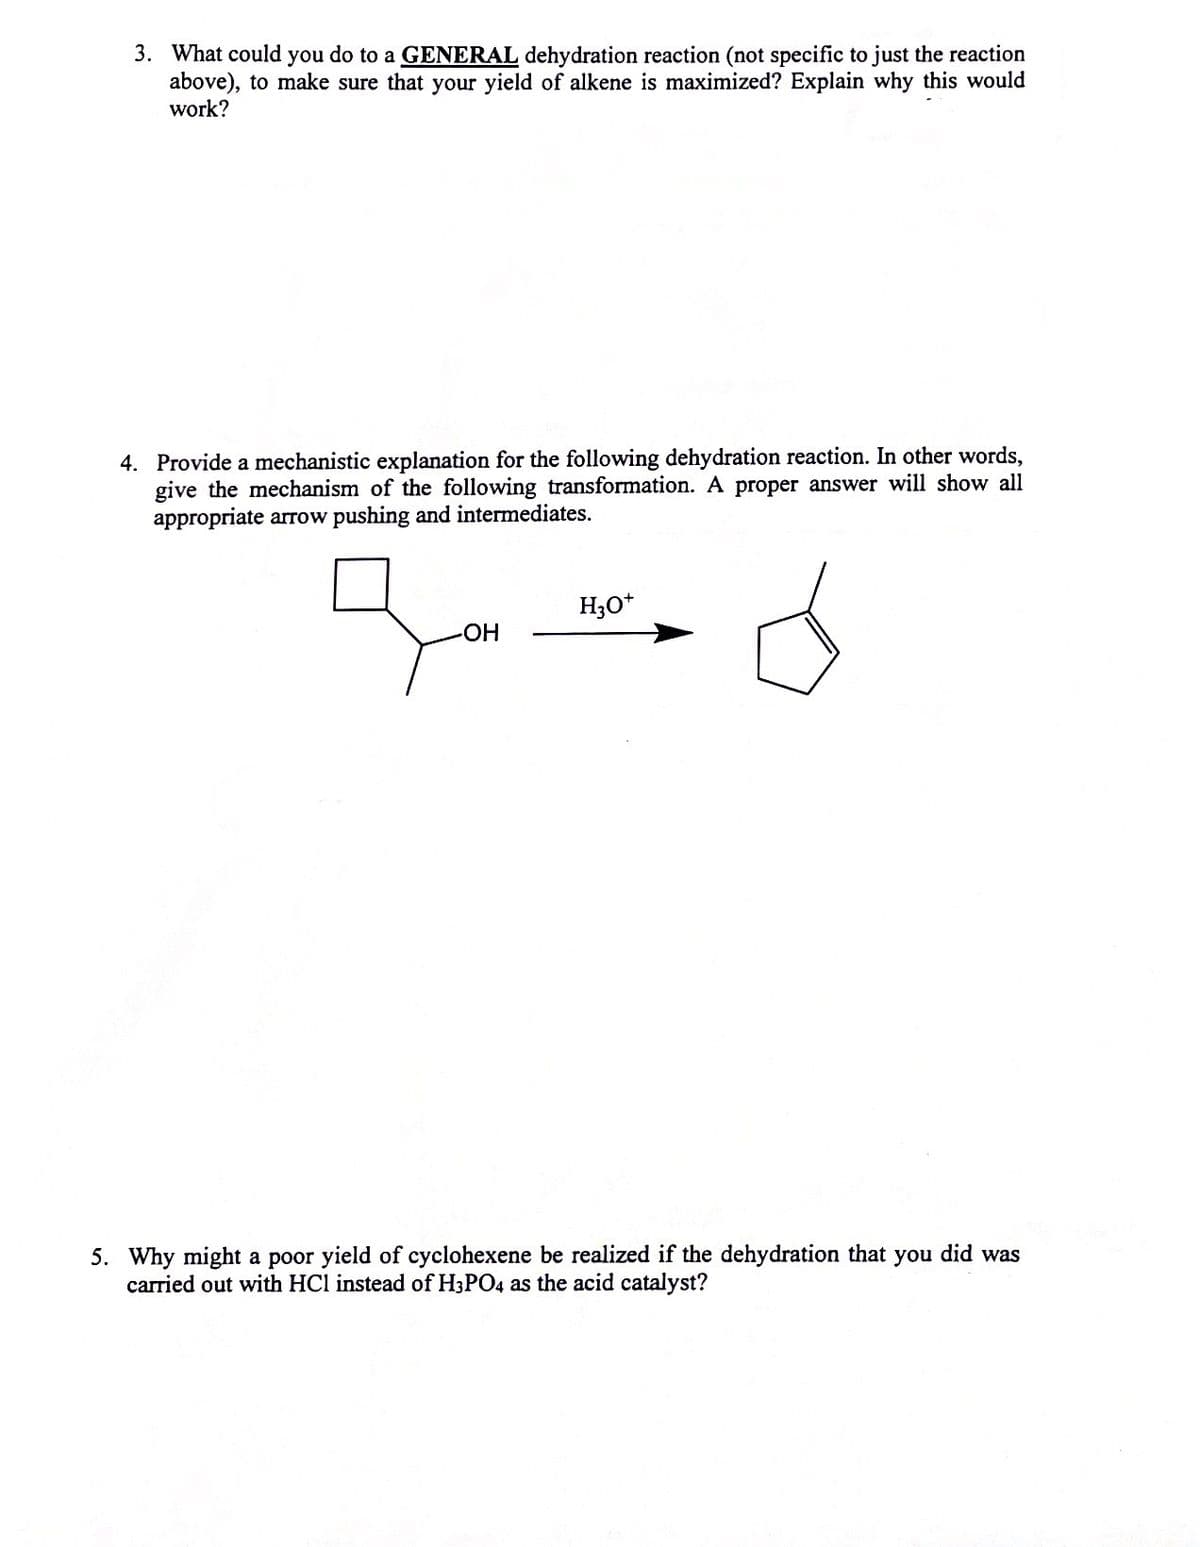 3. What could you do to a GENERAL dehydration reaction (not specific to just the reaction
above), to make sure that your yield of alkene is maximized? Explain why this would
work?
4. Provide a mechanistic explanation for the following dehydration reaction. In other words,
give the mechanism of the following transformation. A proper answer will show all
appropriate arrow pushing and intermediates.
H3O*
HO-
5. Why might a poor yield of cyclohexene be realized if the dehydration that you did was
carried out with HCl instead of H3PO4 as the acid catalyst?
